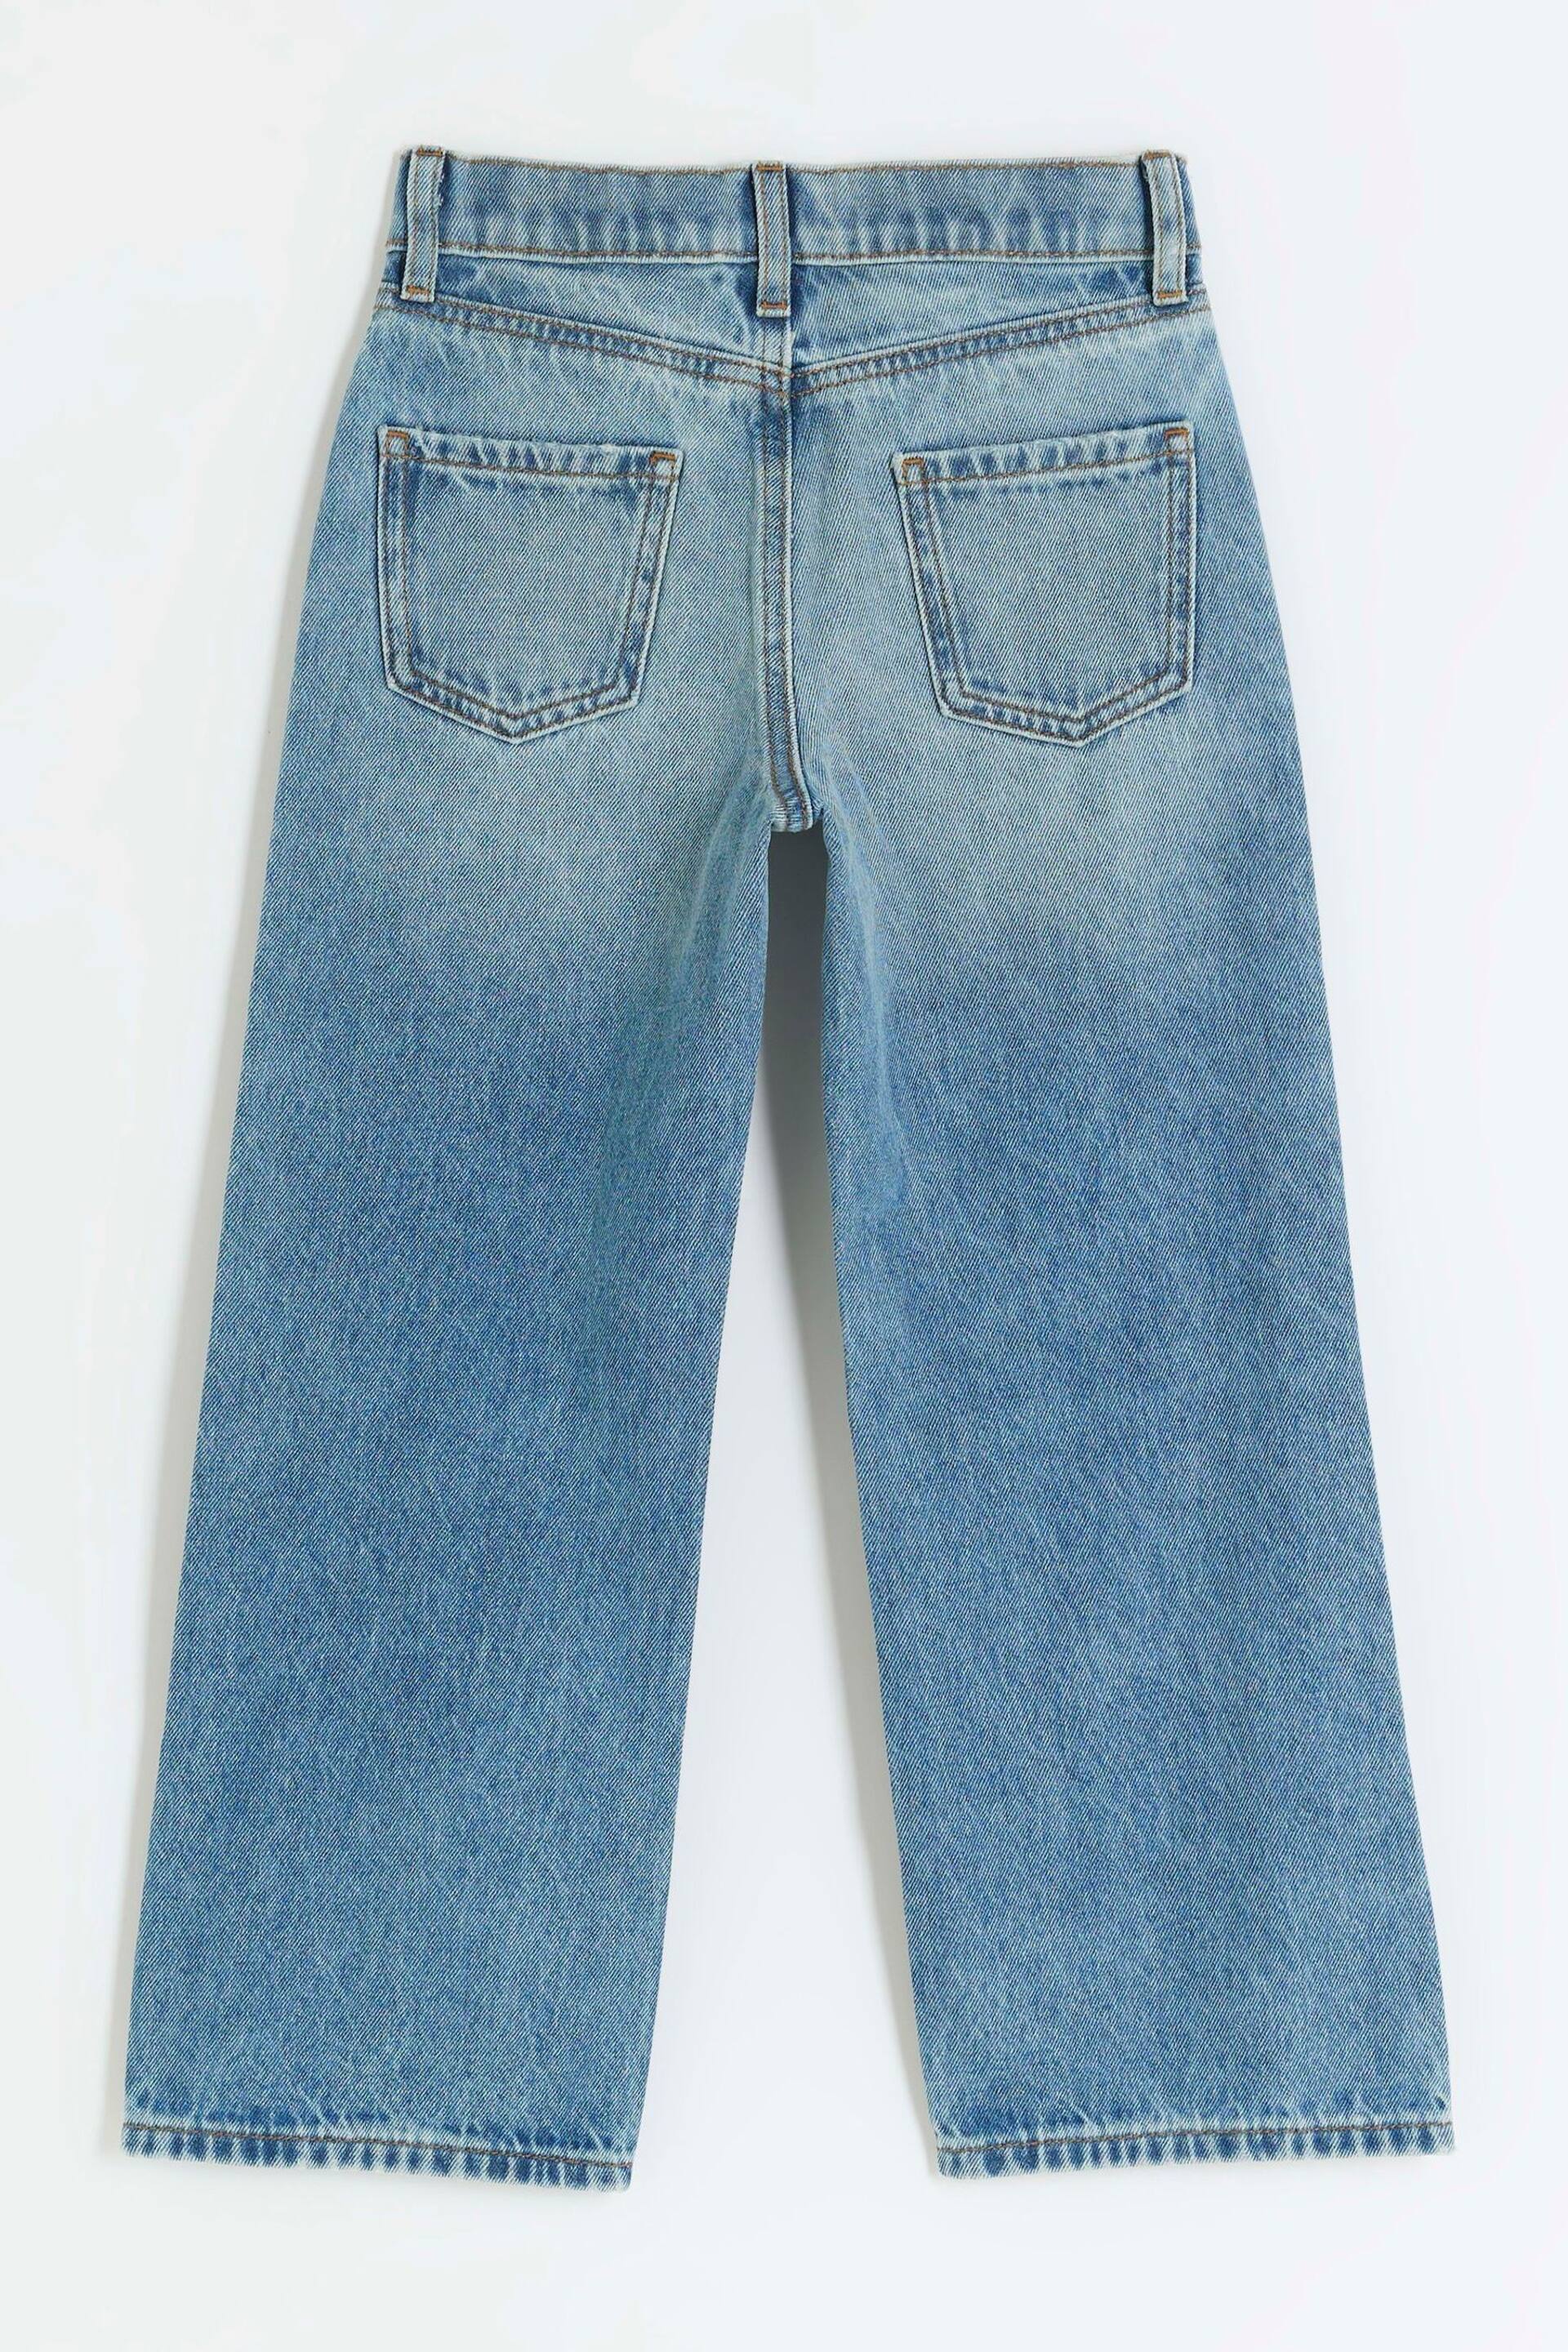 River Island Blue Girls Straight Jeans - Image 2 of 4